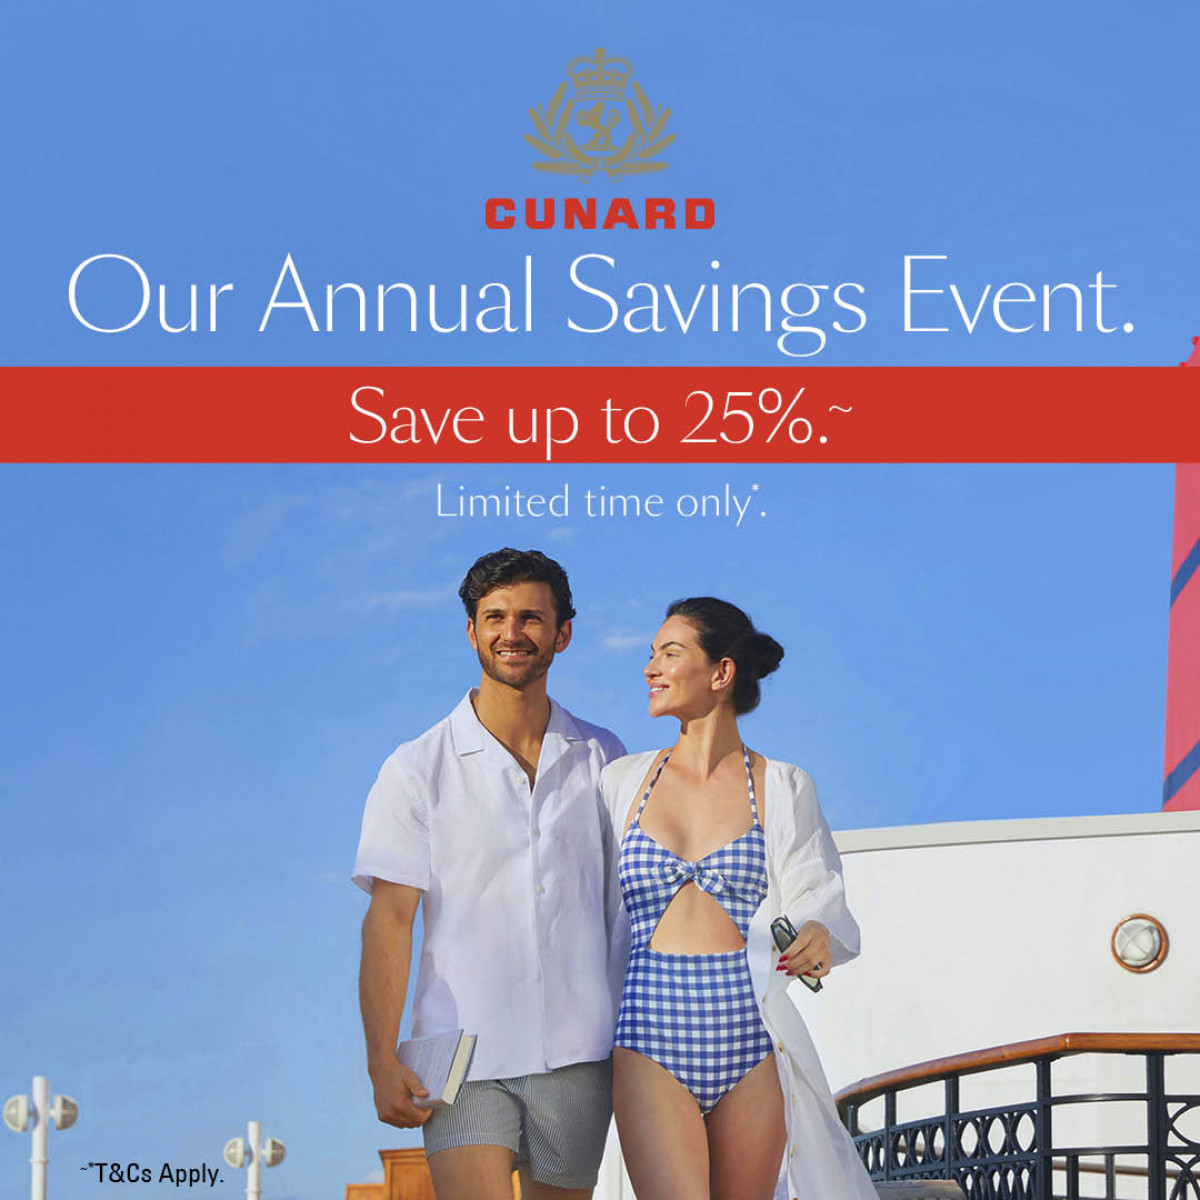 Save up to 25% off Cunard launch fares